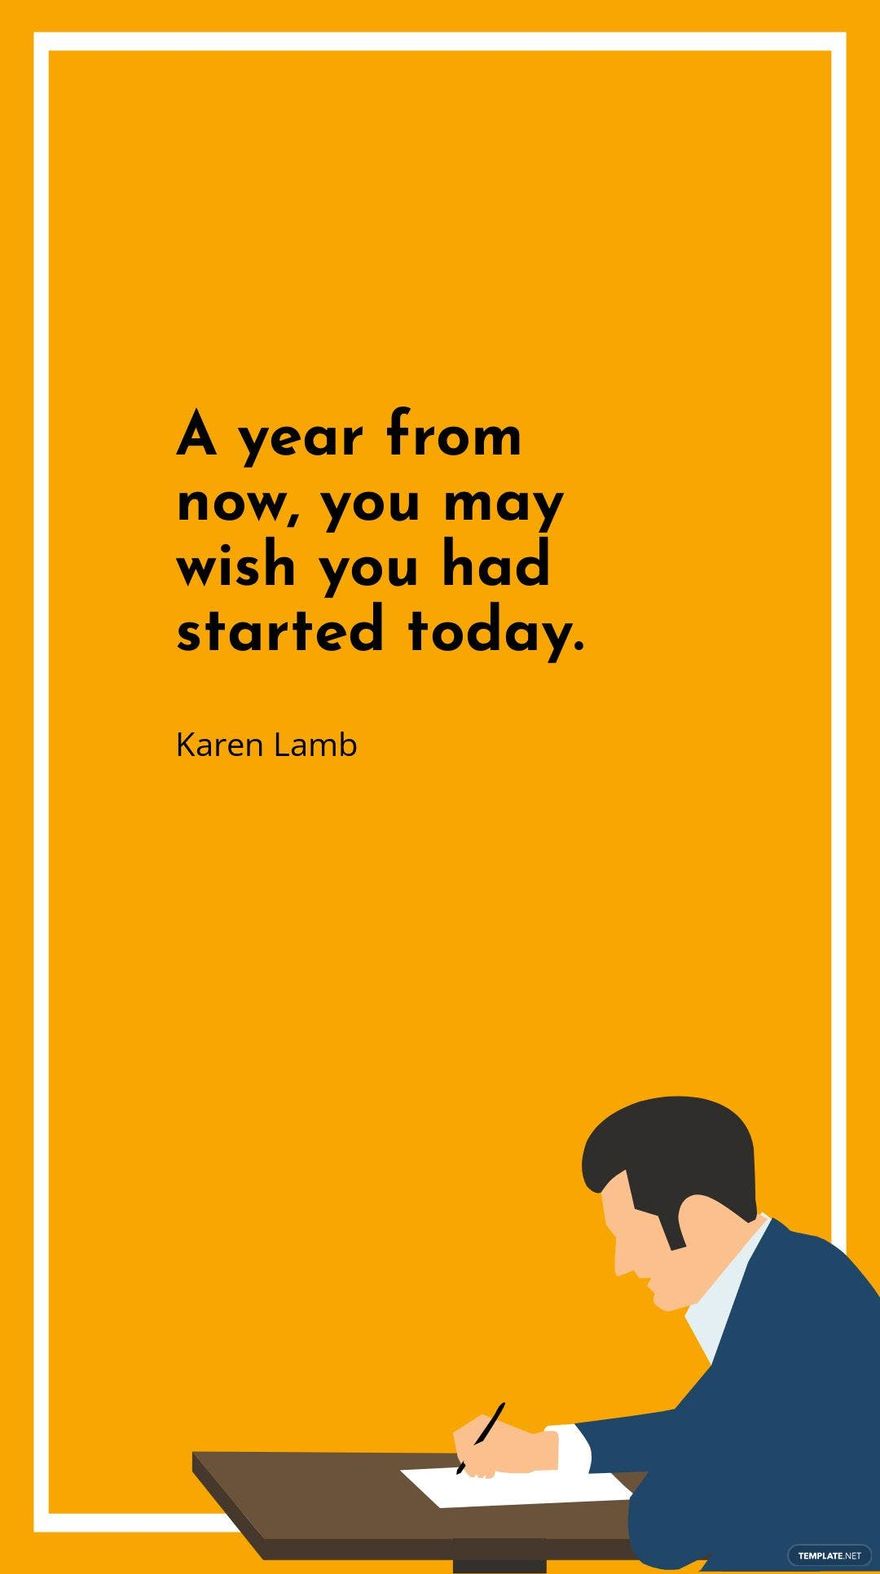 Karen Lamb - A year from now, you may wish you had started today.